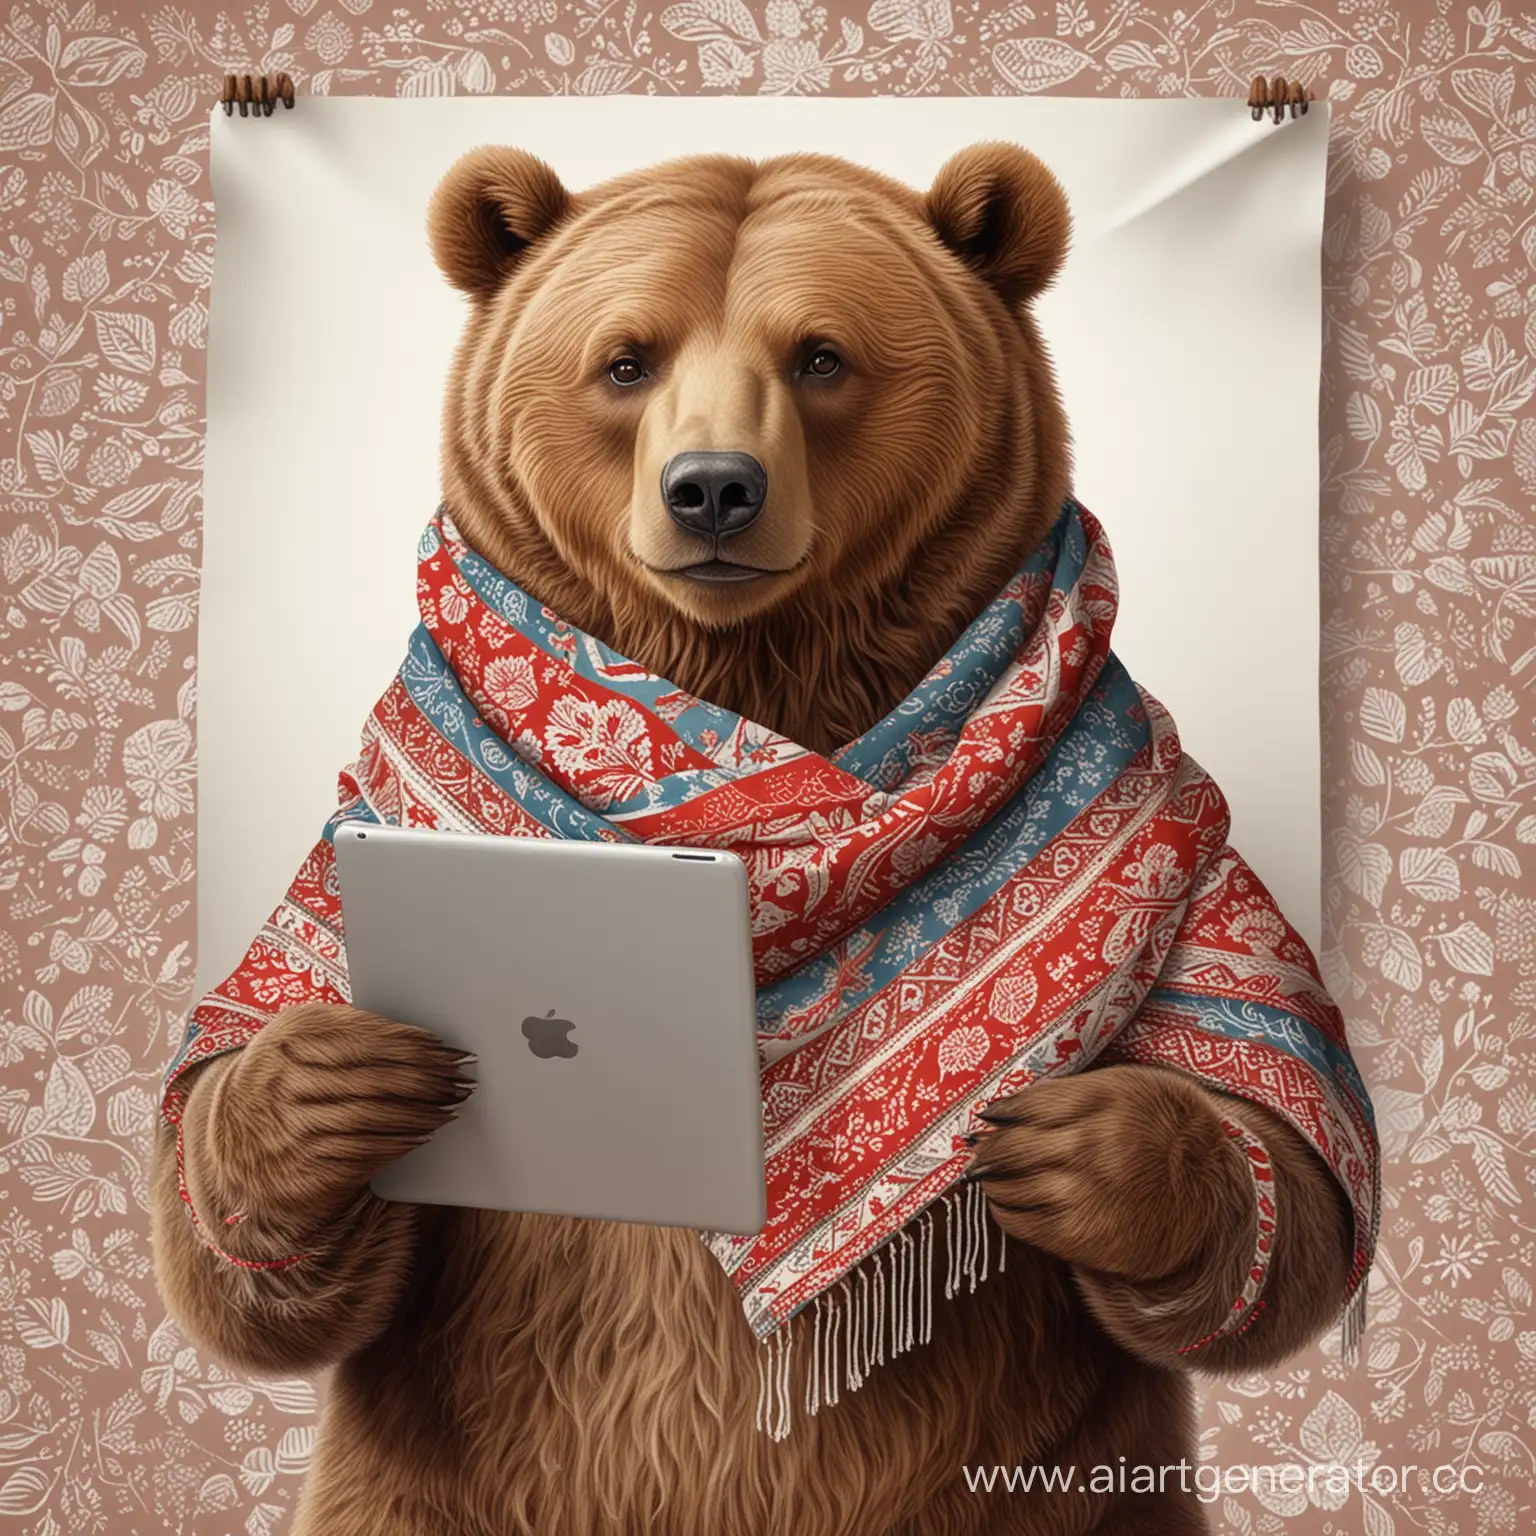 Russian-Scarf-Bear-Drawing-on-Tablet